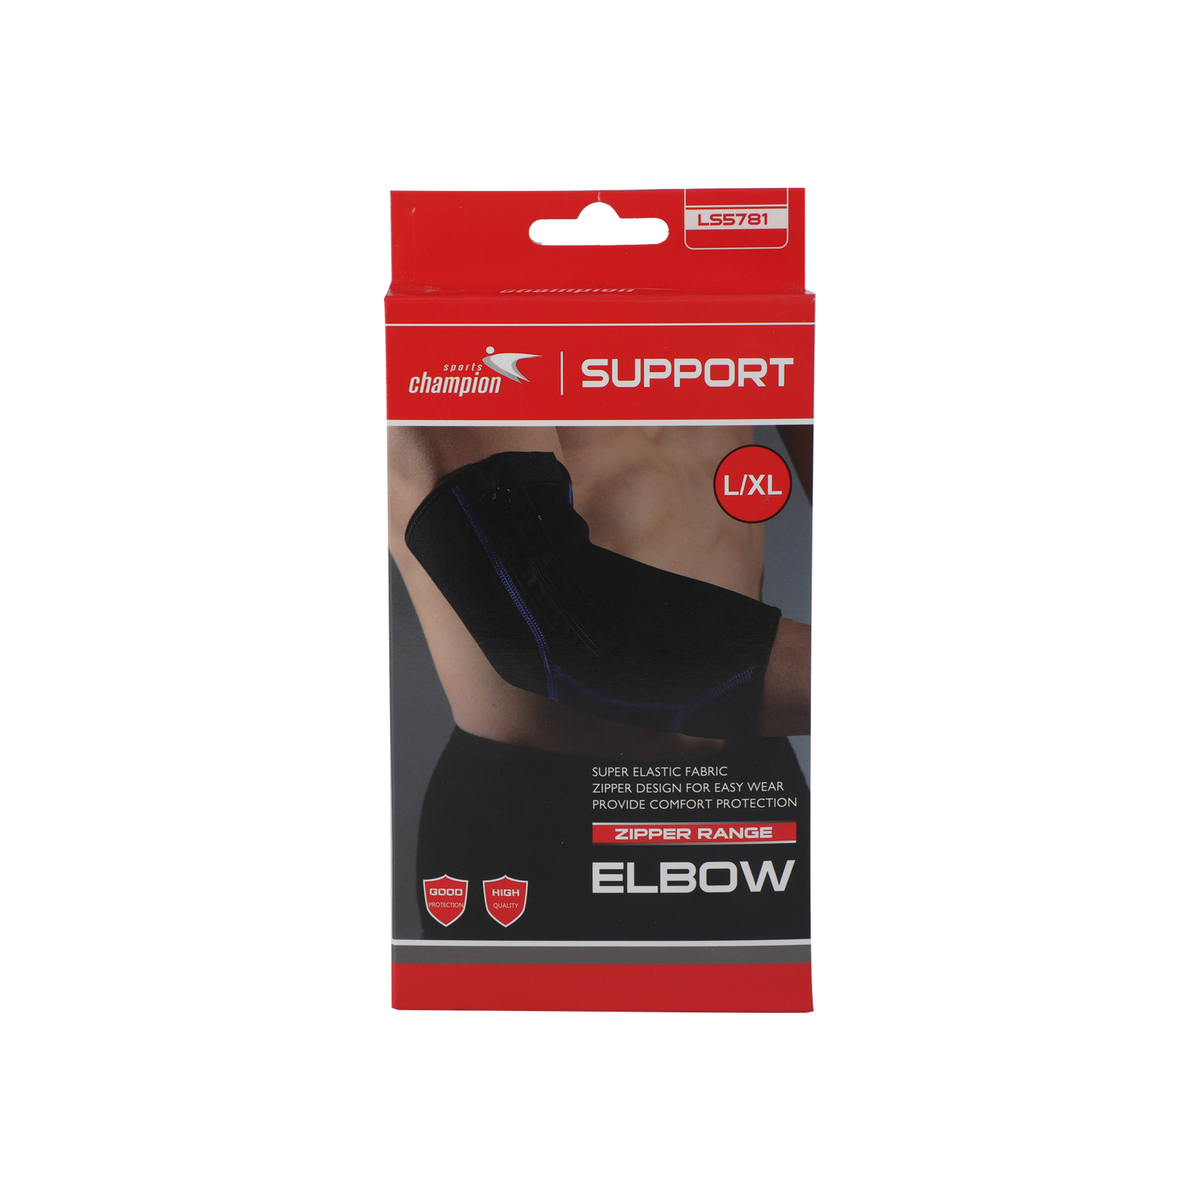 Sports Champion Elbow Support LS5781 Large